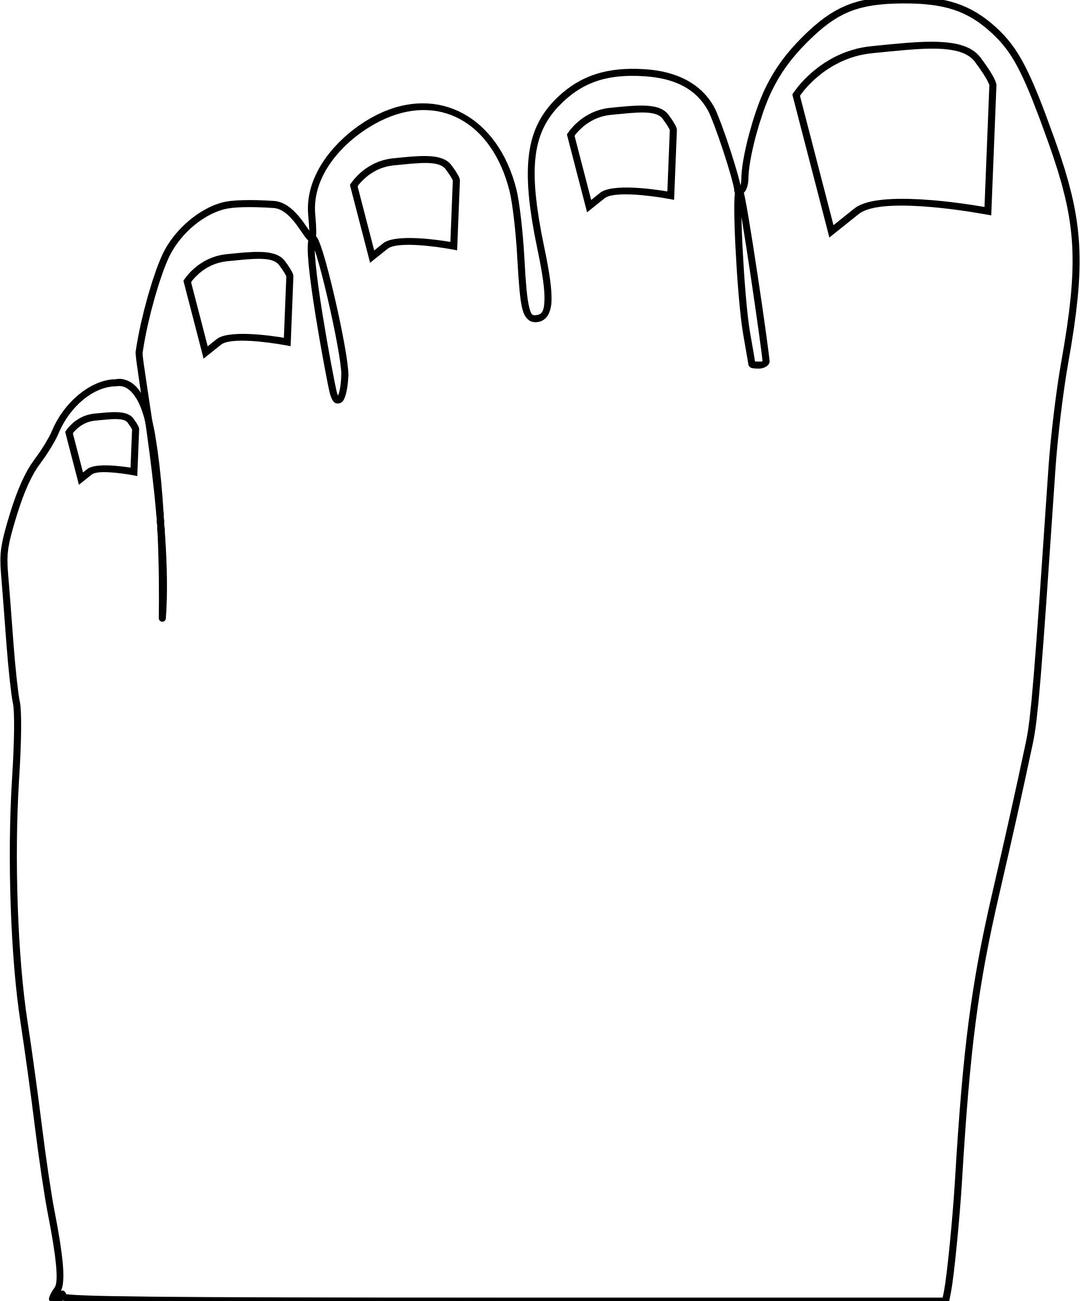 Toes Outline png transparent